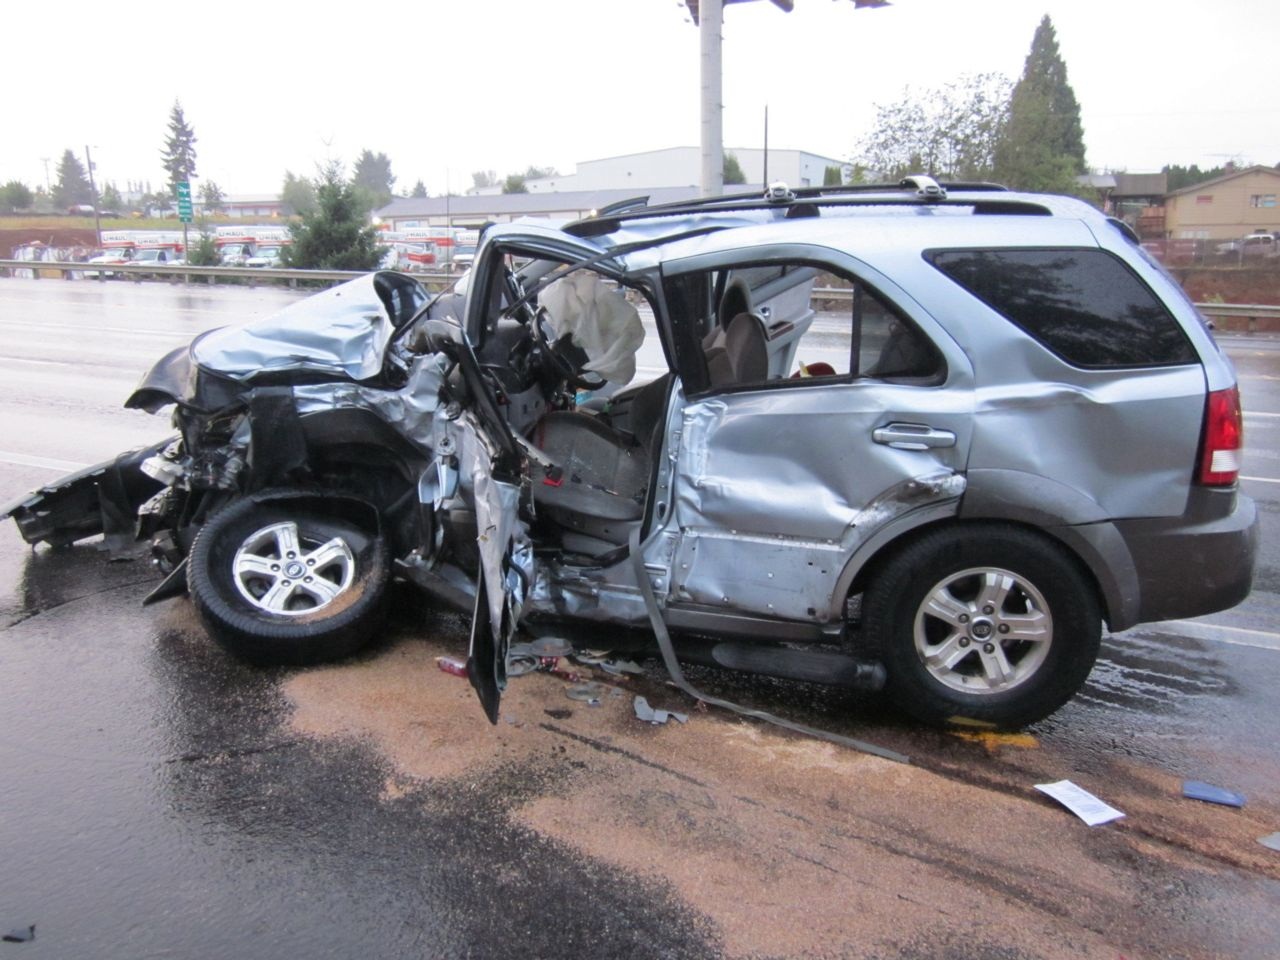 Get top Attorneys for Motor Vehicle Accidents